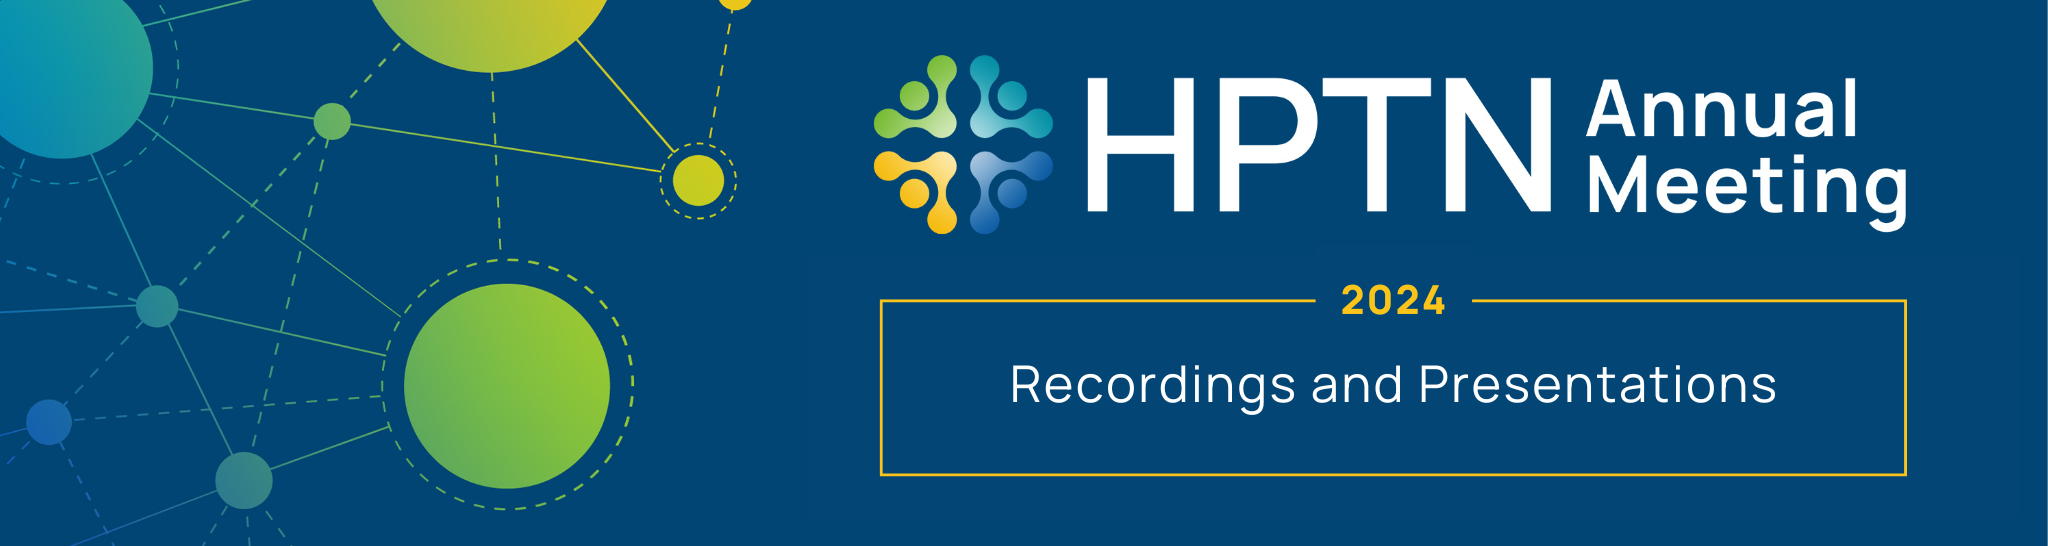 2024 HPTN Annual Meeting: Recordings and Presentations